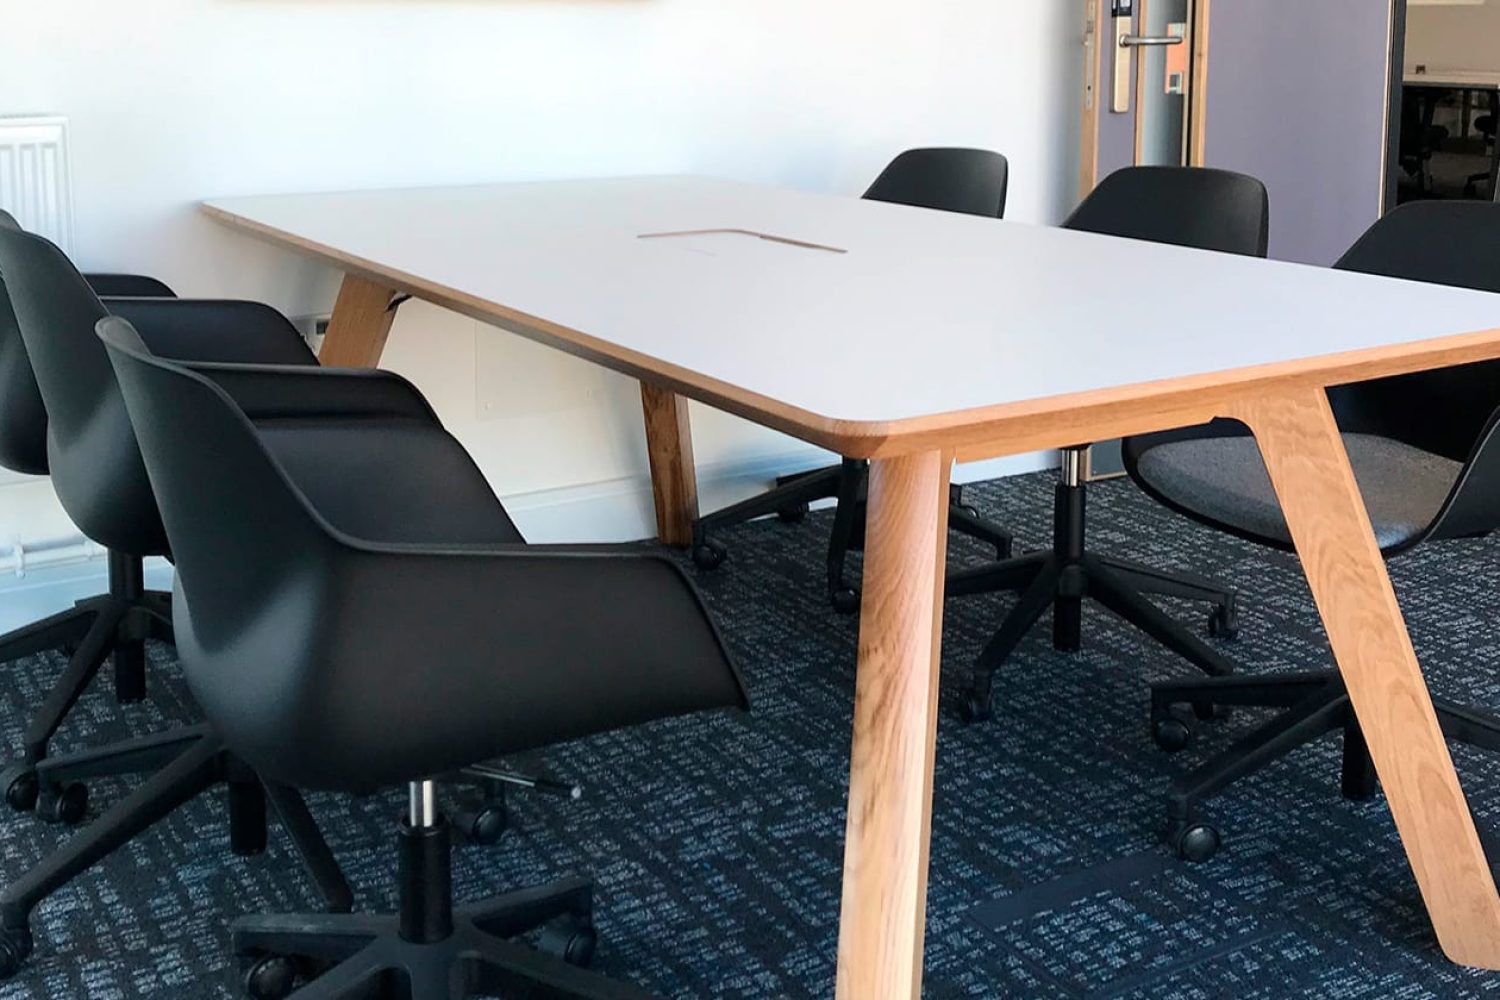 A conference table with wooden legs and chairs in an office.